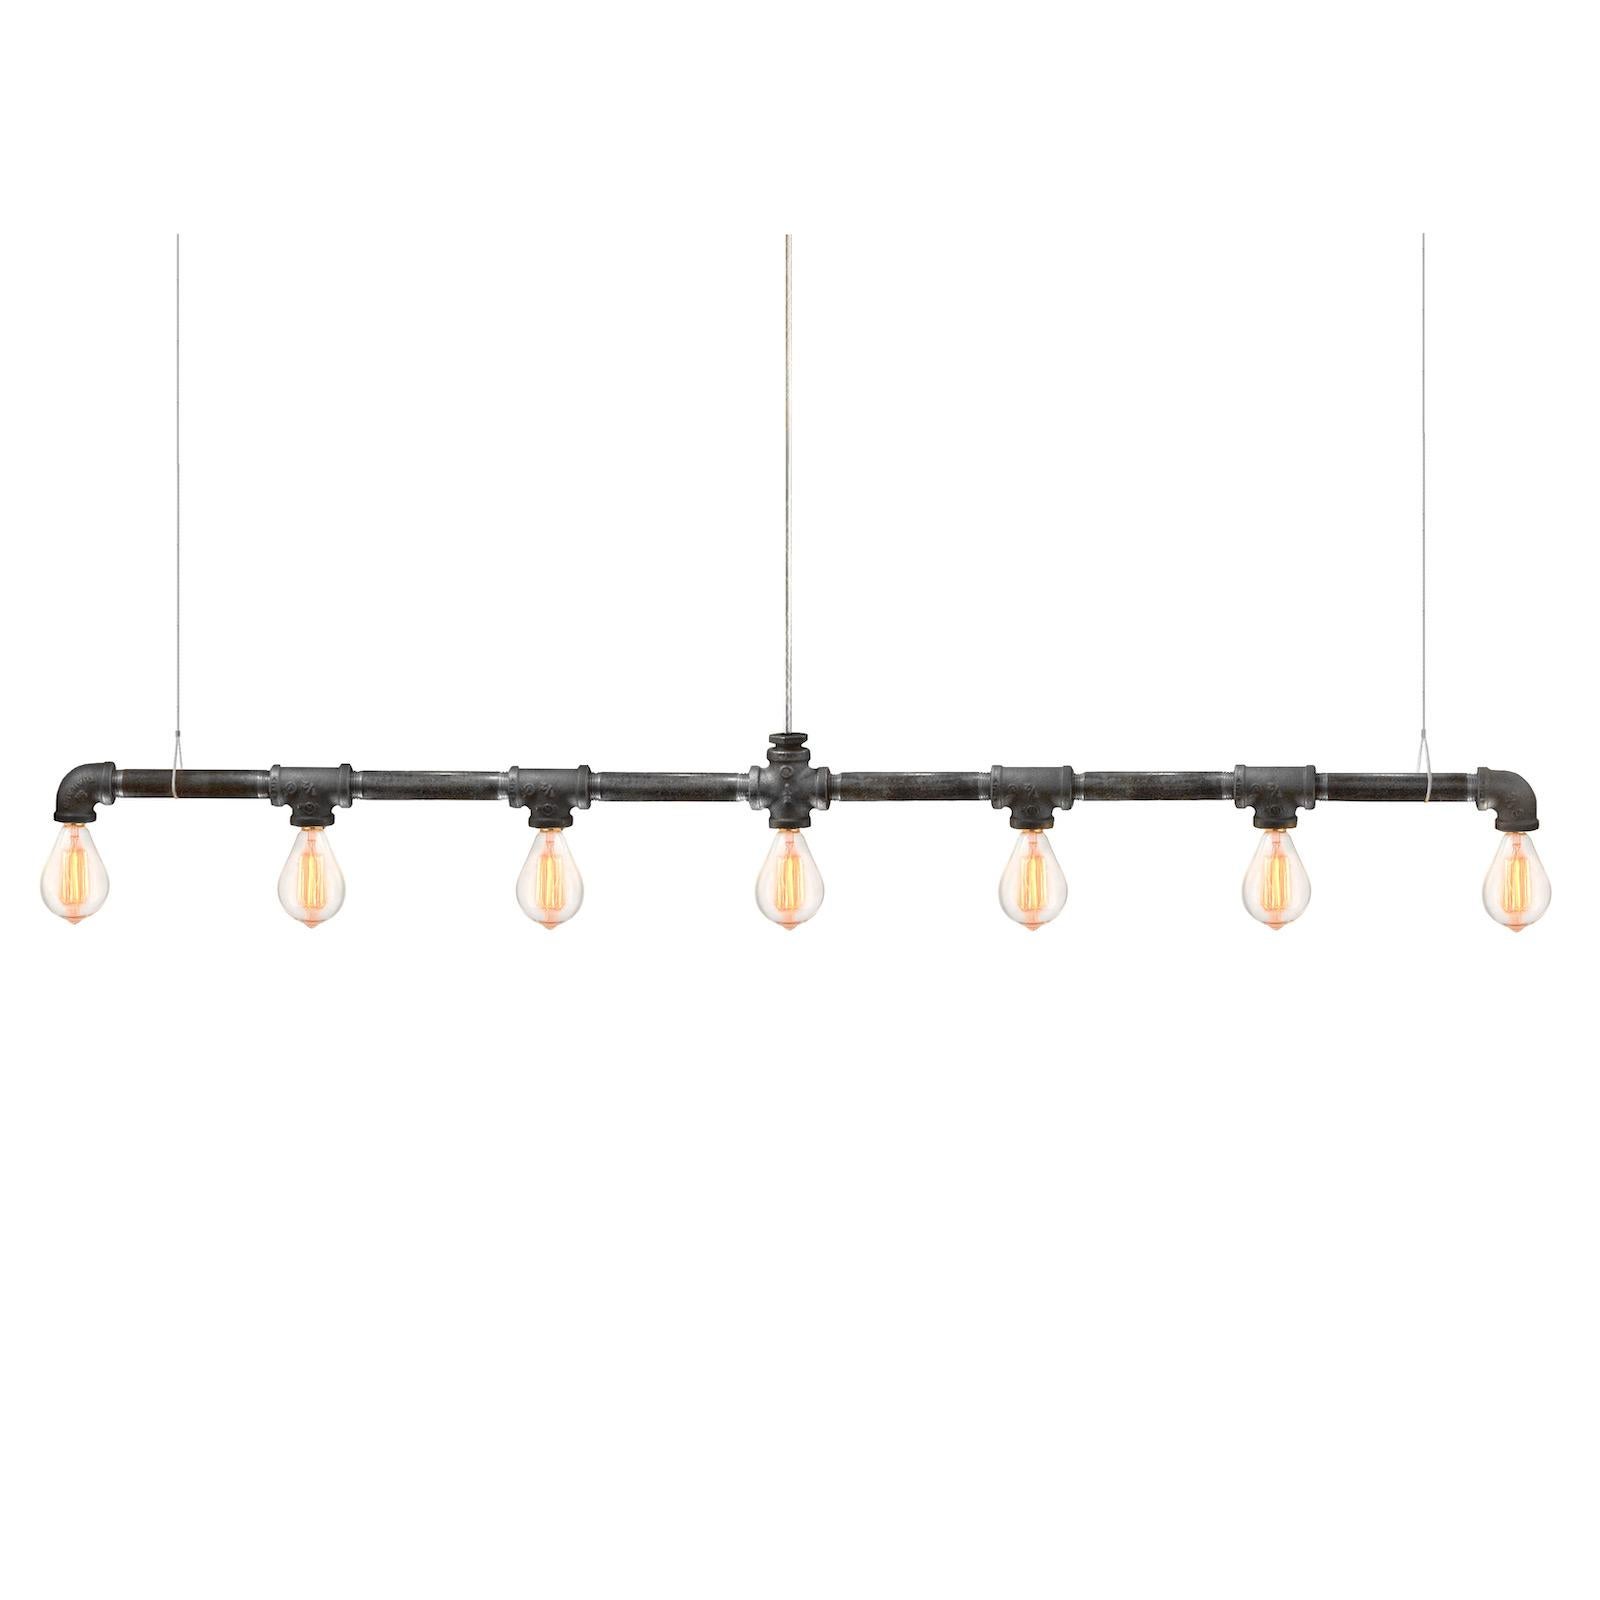 Raw Bar Linear Suspension 42 by Michael McHale
Dimensions: D 4 x W 107 x H 15.5 cm.
Materials: steel, optically-pure gem-cut crystal.

7 x candelabra base CA7 bulb, either incandescent or LED.

All our lamps can be wired according to each